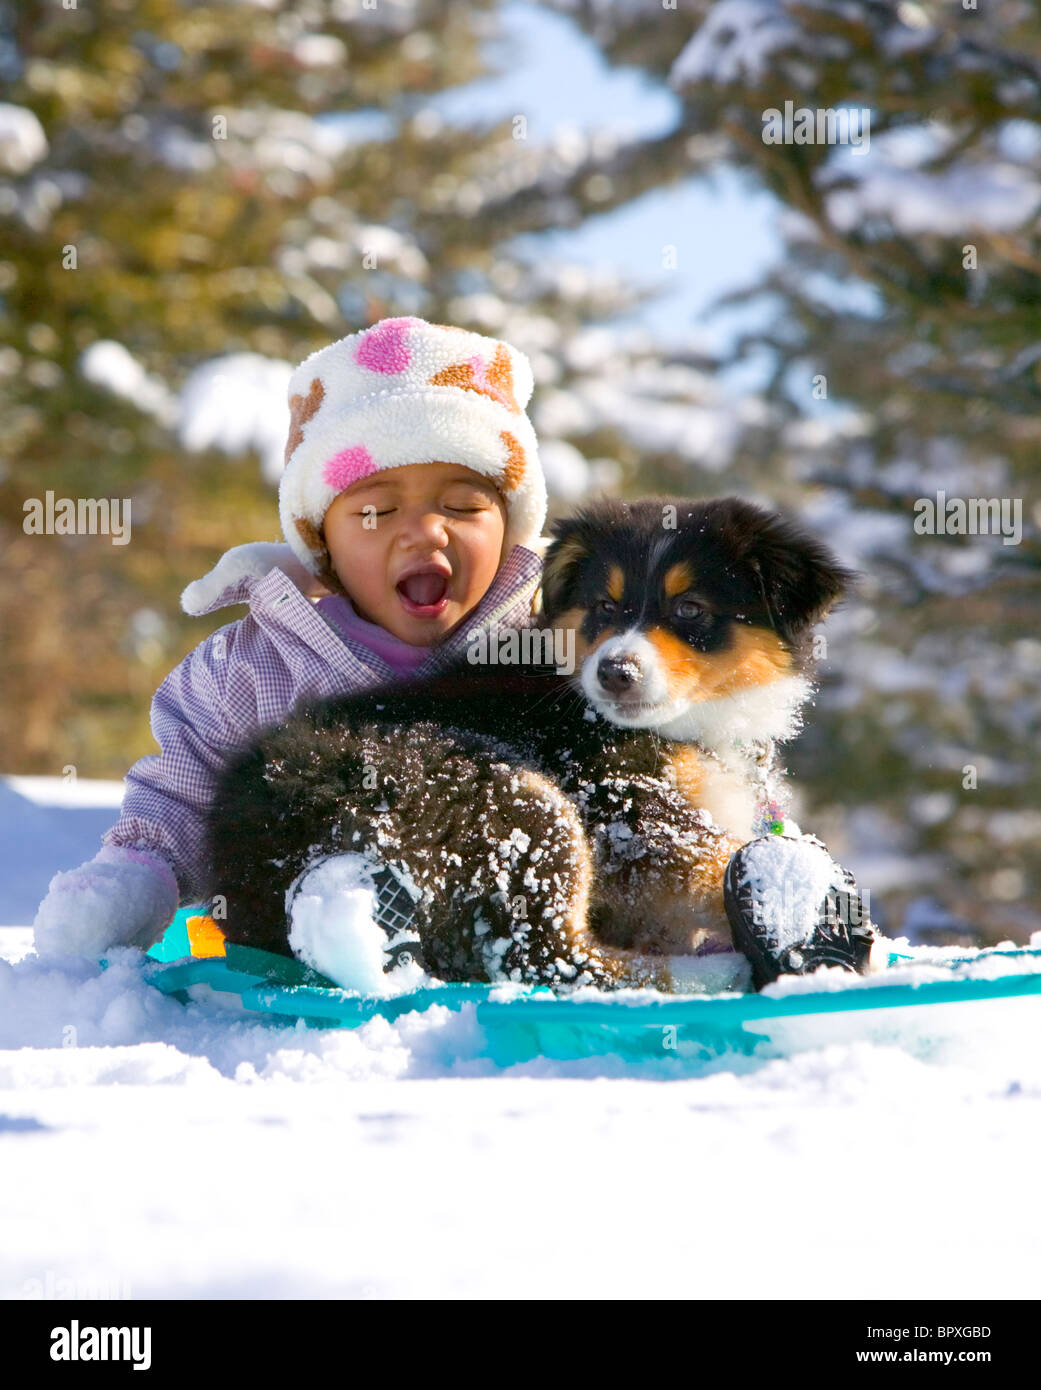 1-year-old baby girl sledding with her dog, a 12-week-old puppy, in Carbondale, Colorado. Stock Photo